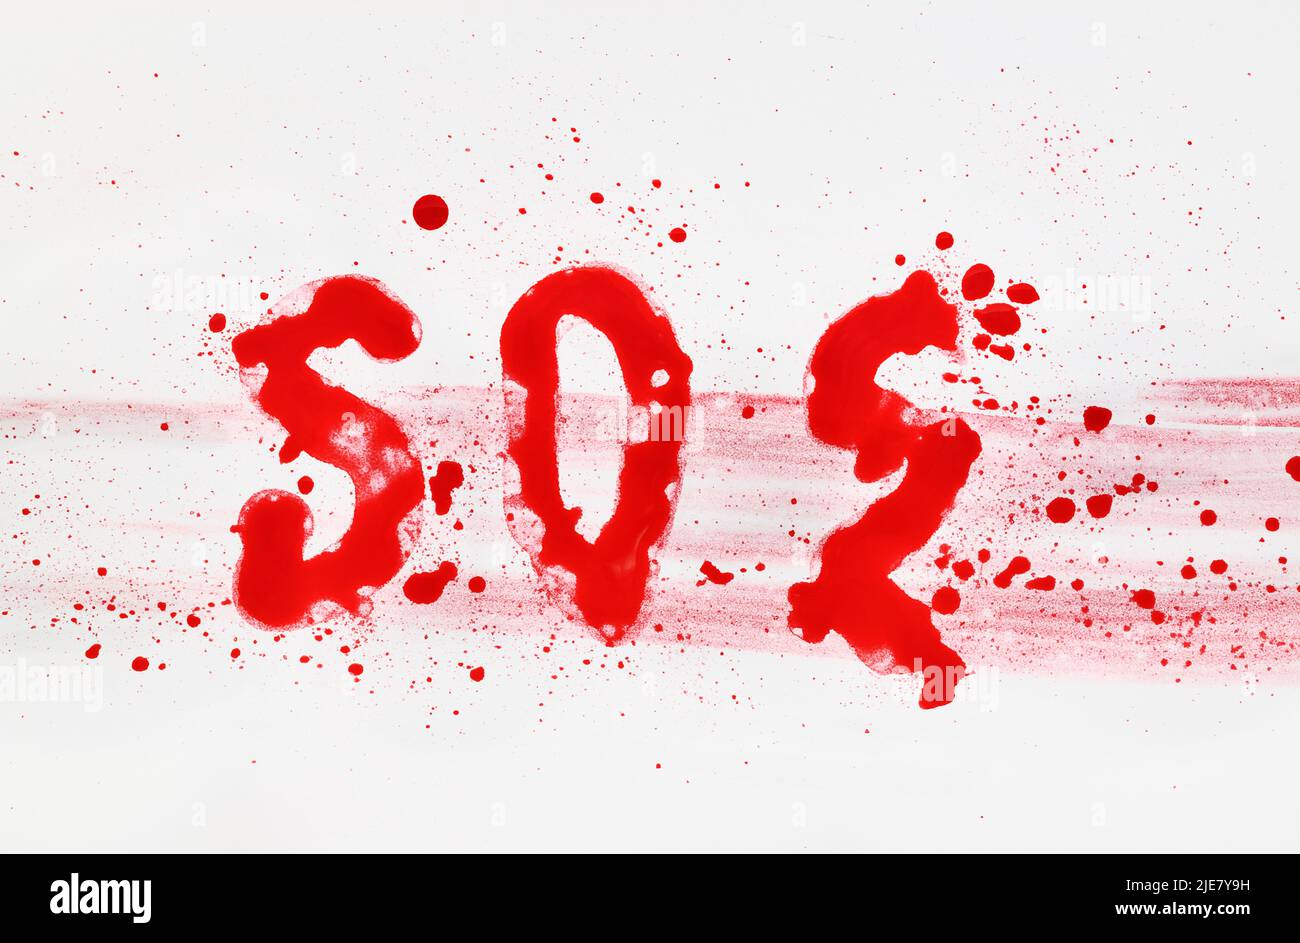 The word SOS drawn with red watercolor on white background Stock Photo